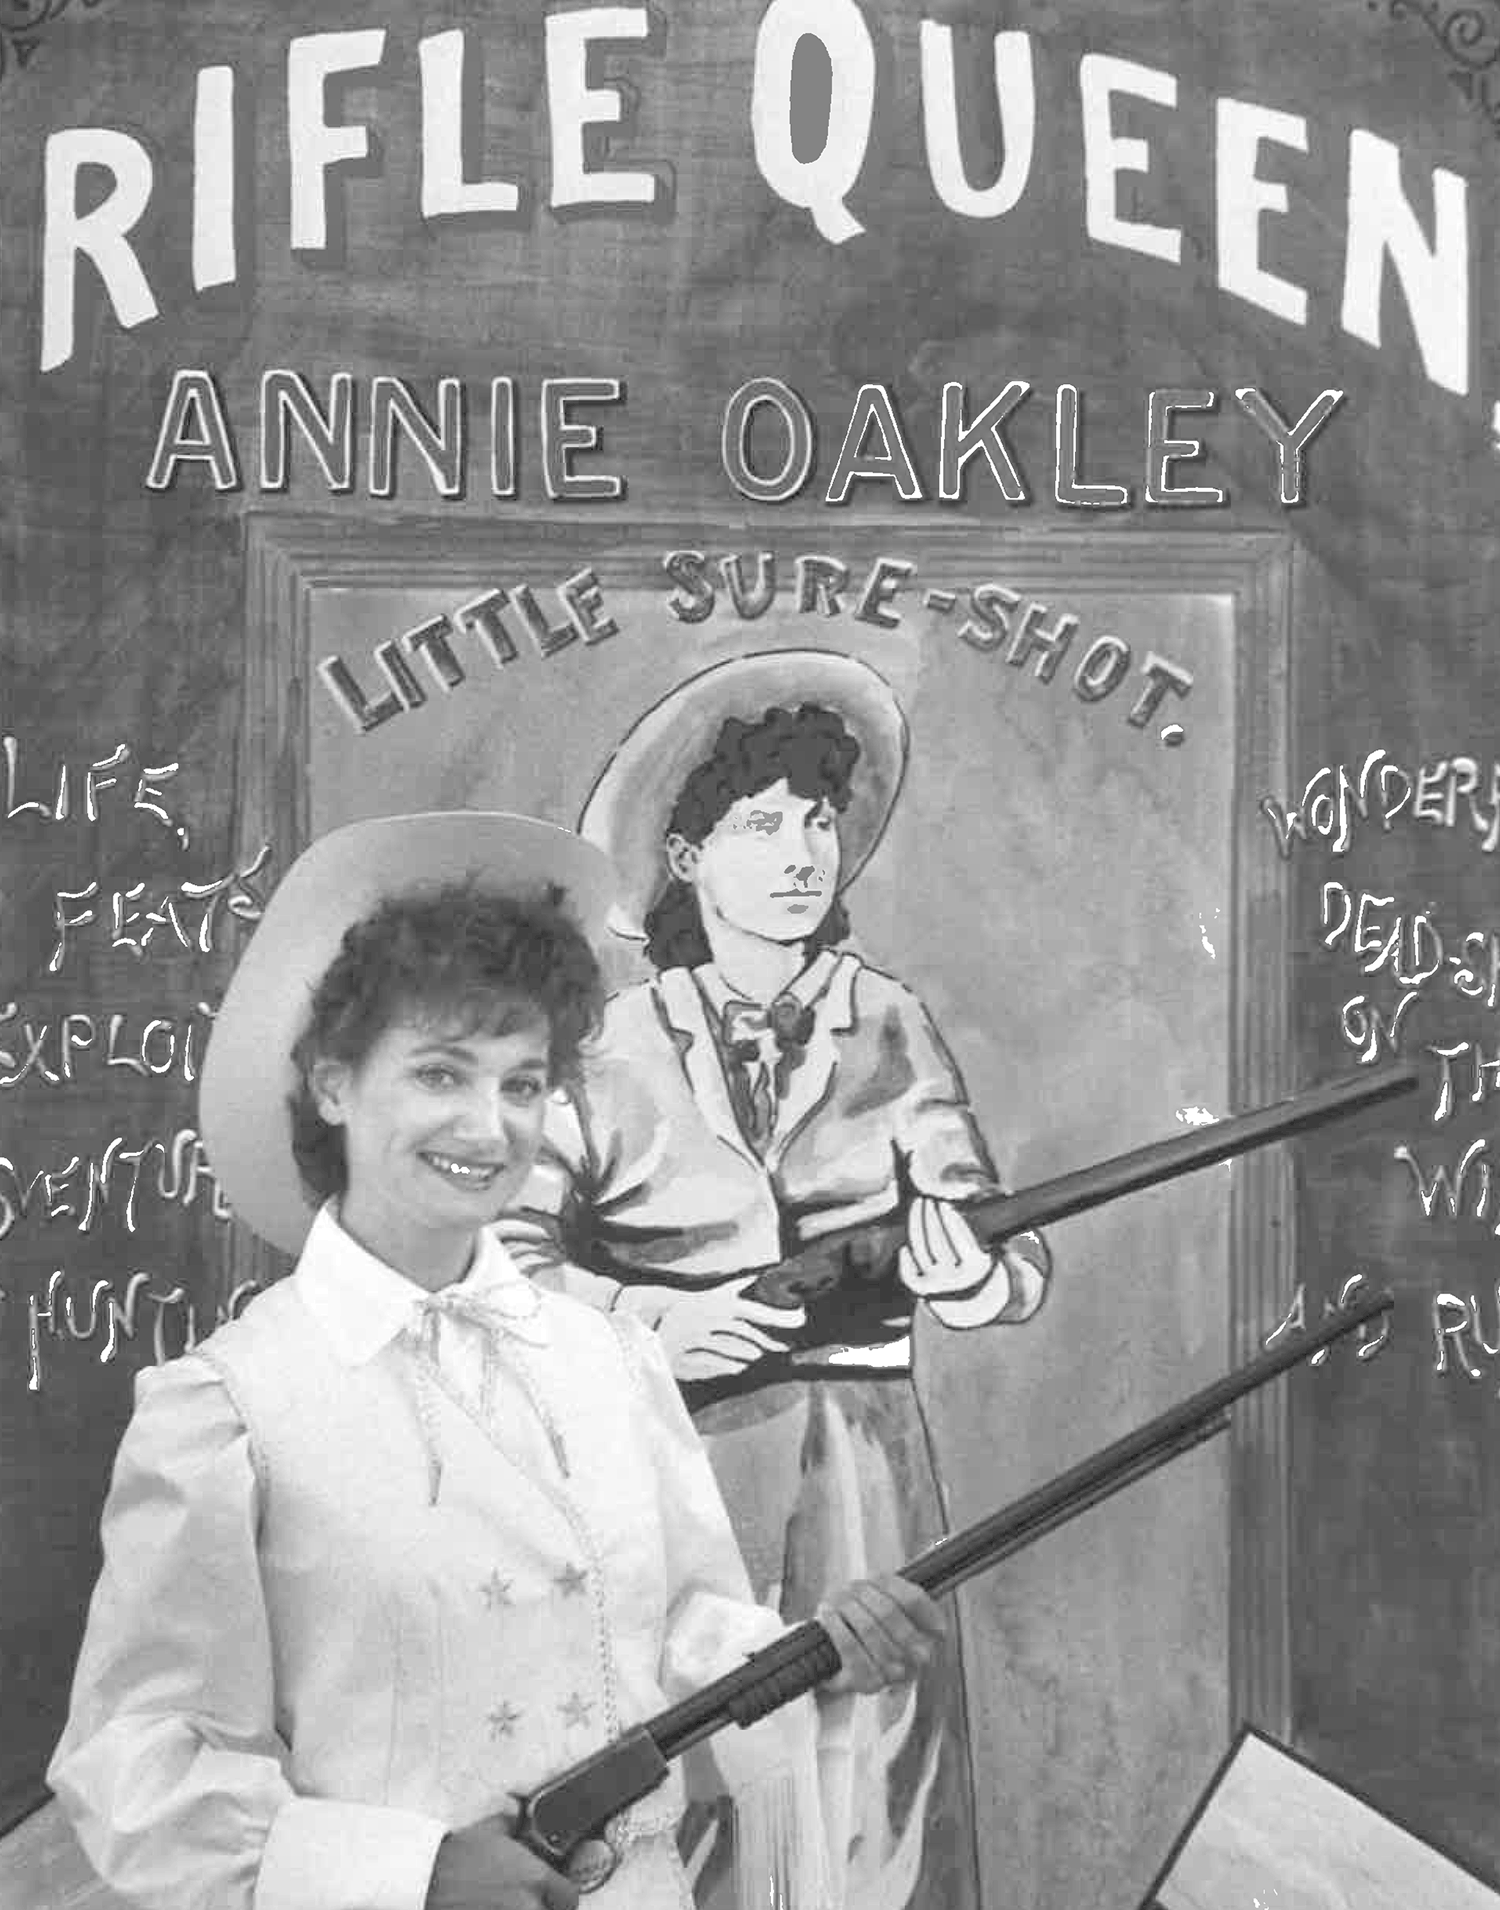 Annie Oakley production, 1989